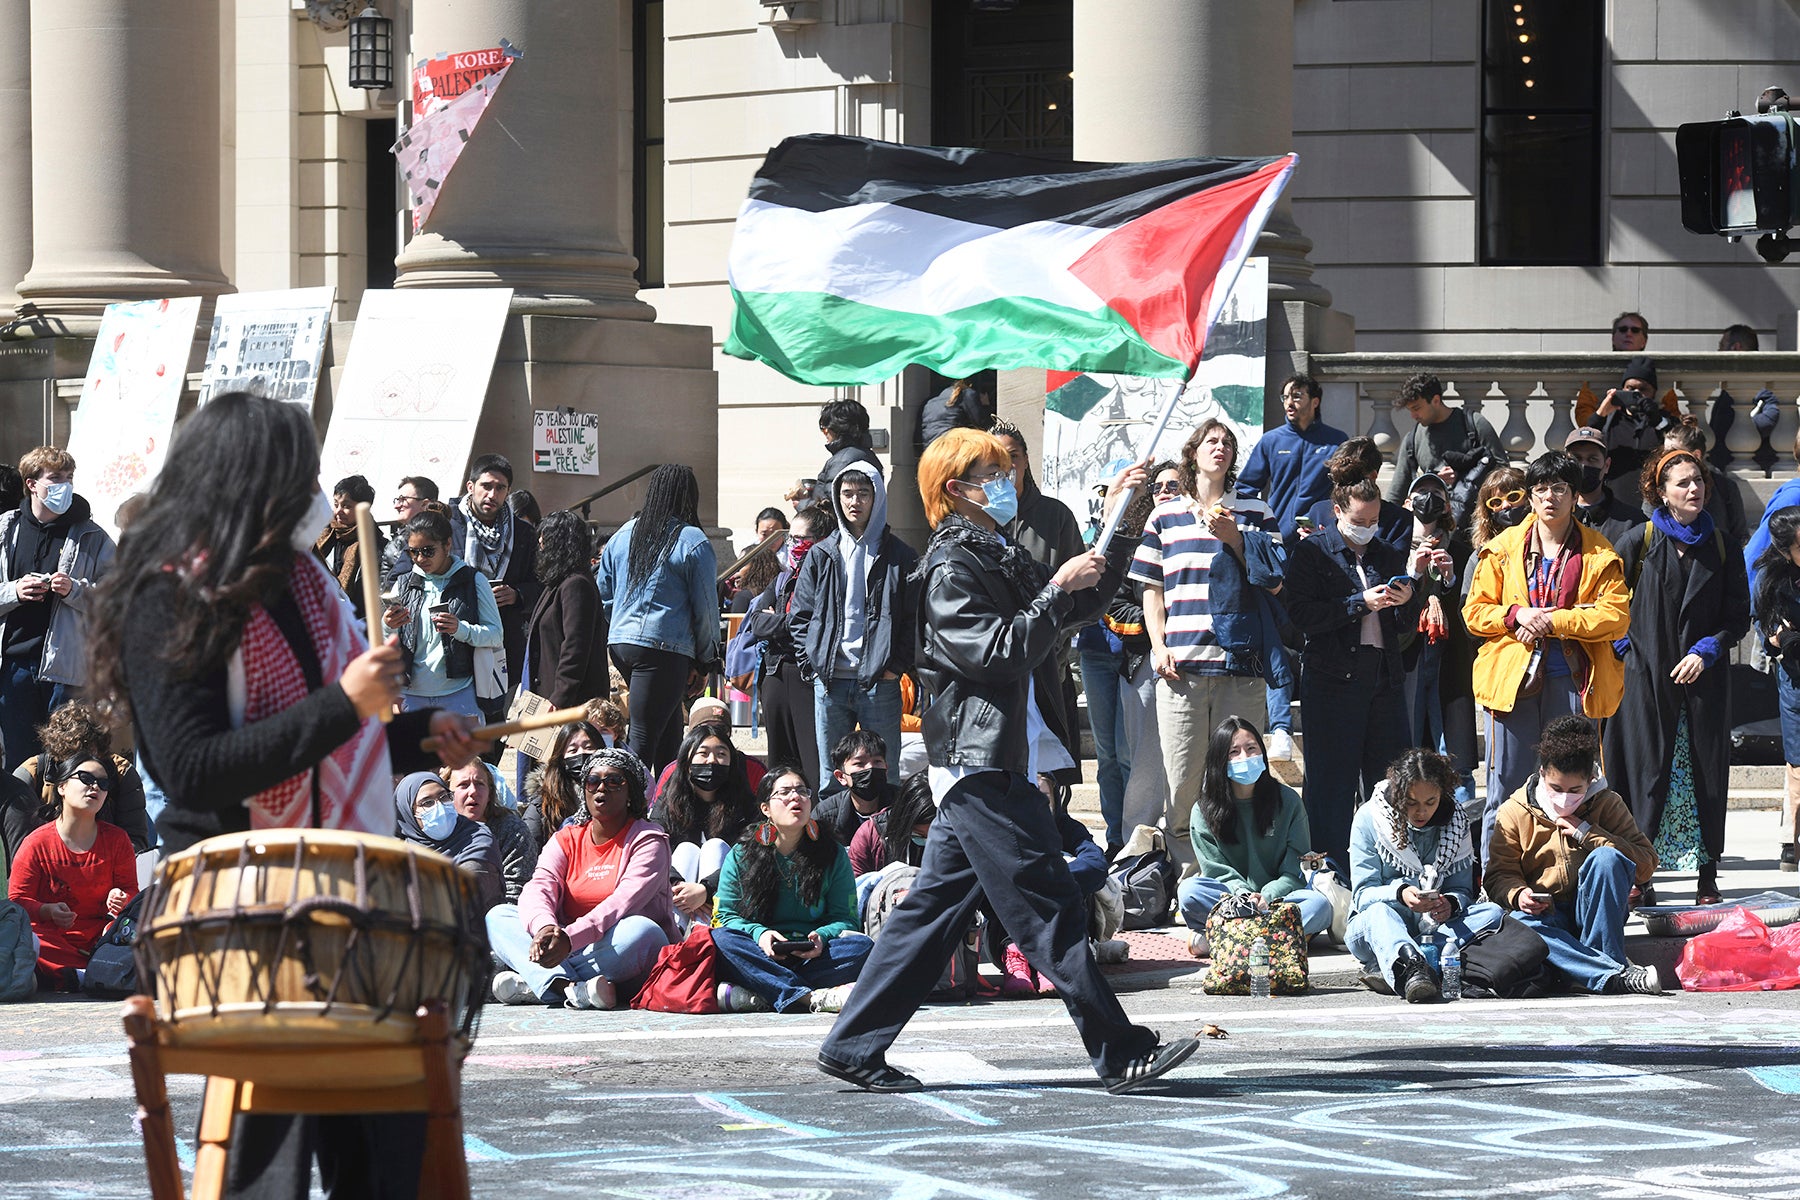 columbia extends negotiations with pro-palestine protesters as mike johnson visits campus: live